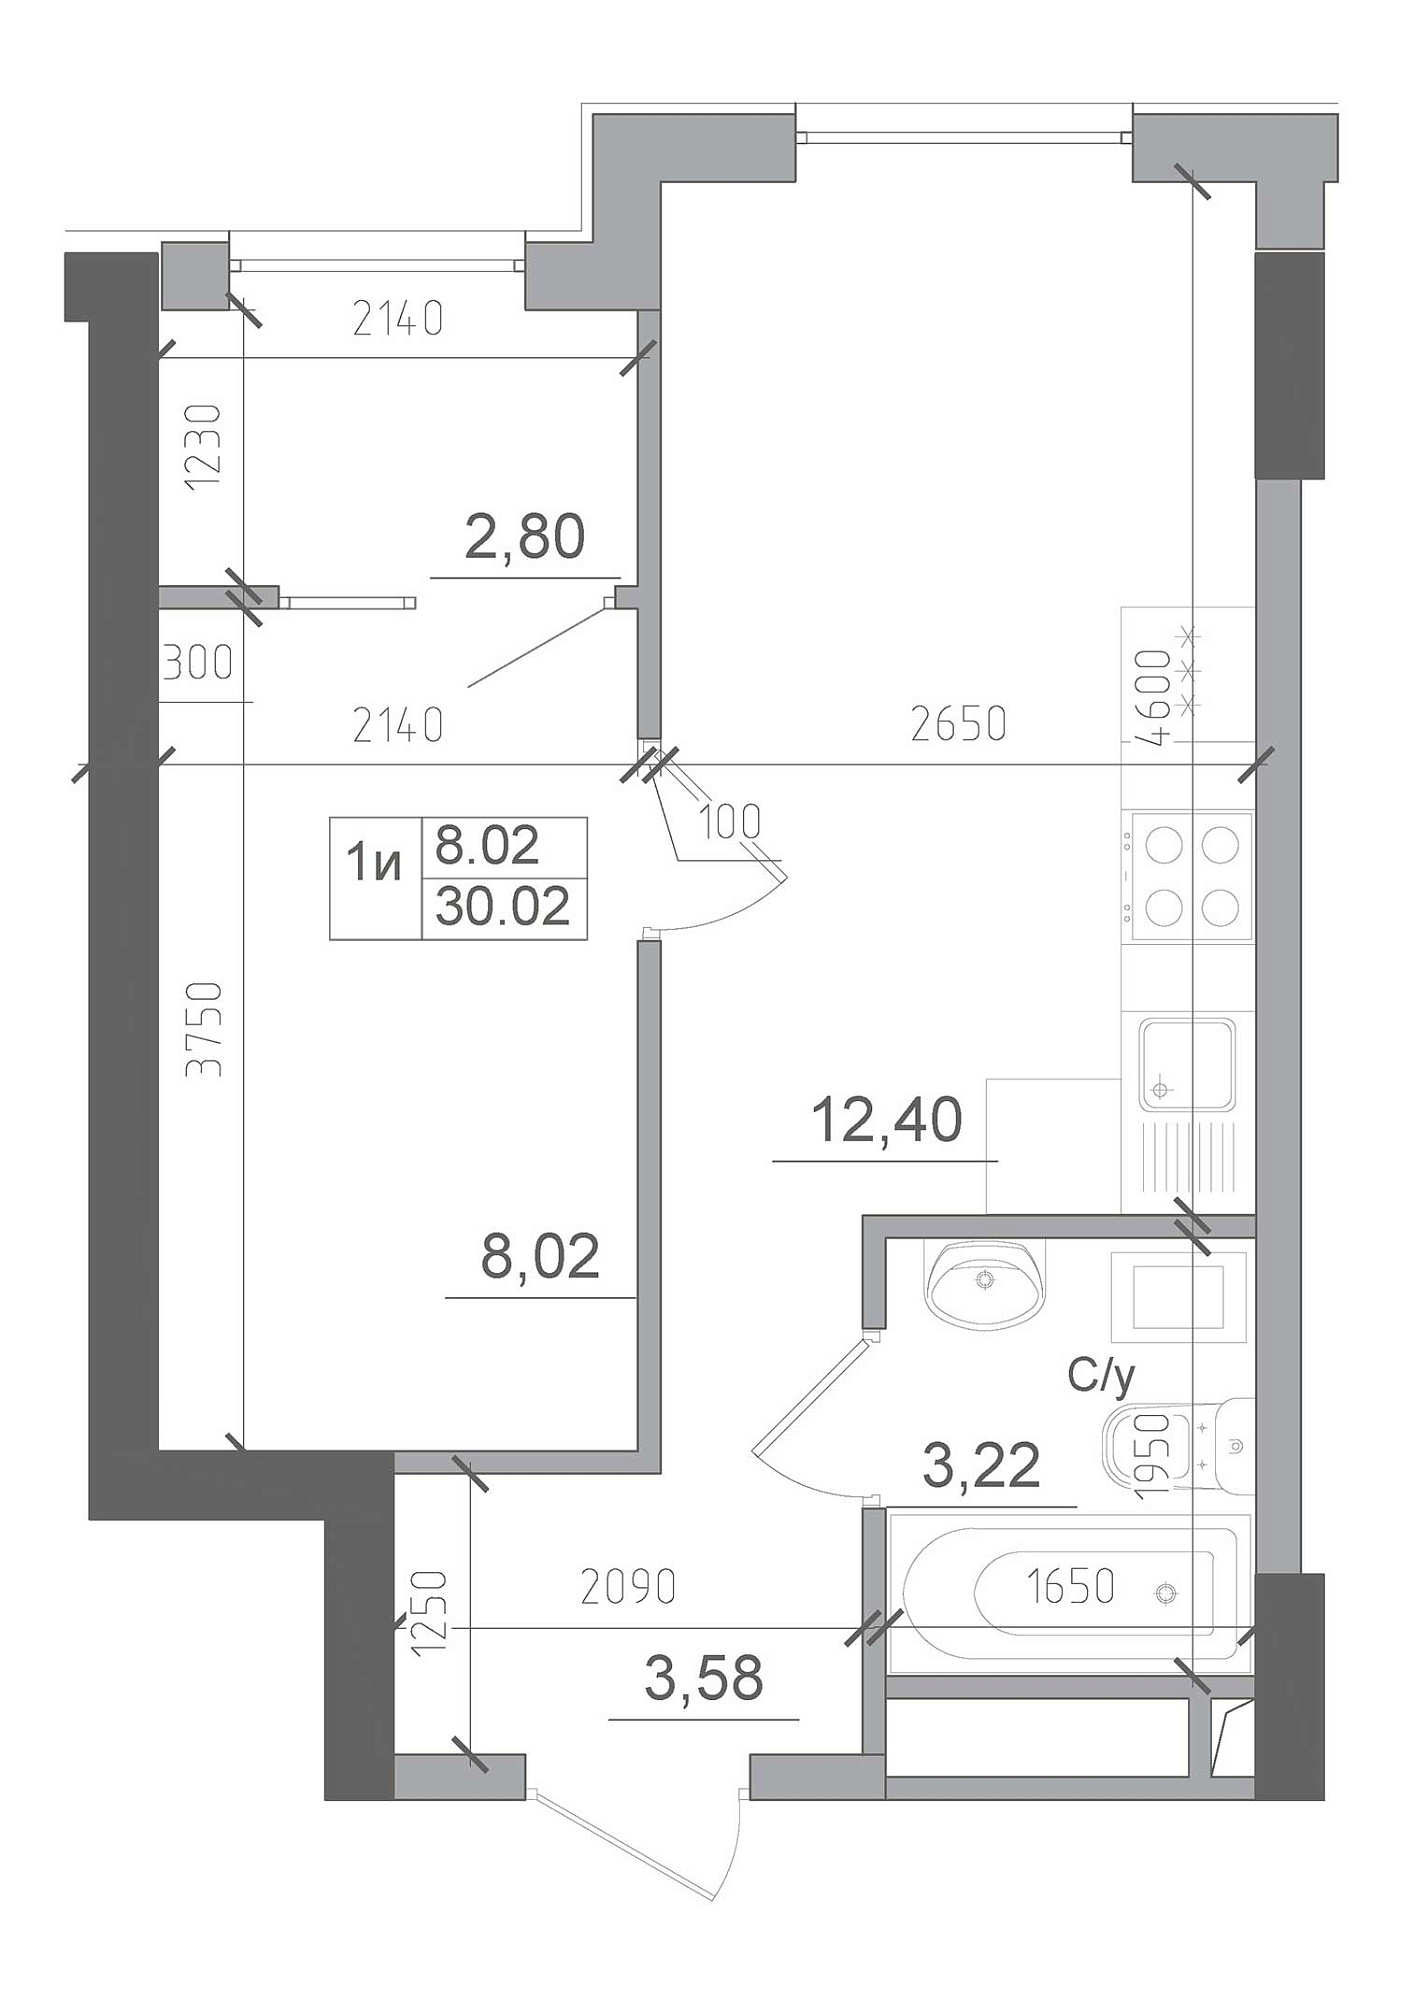 Planning 1-rm flats area 30.02m2, AB-22-01/00014.